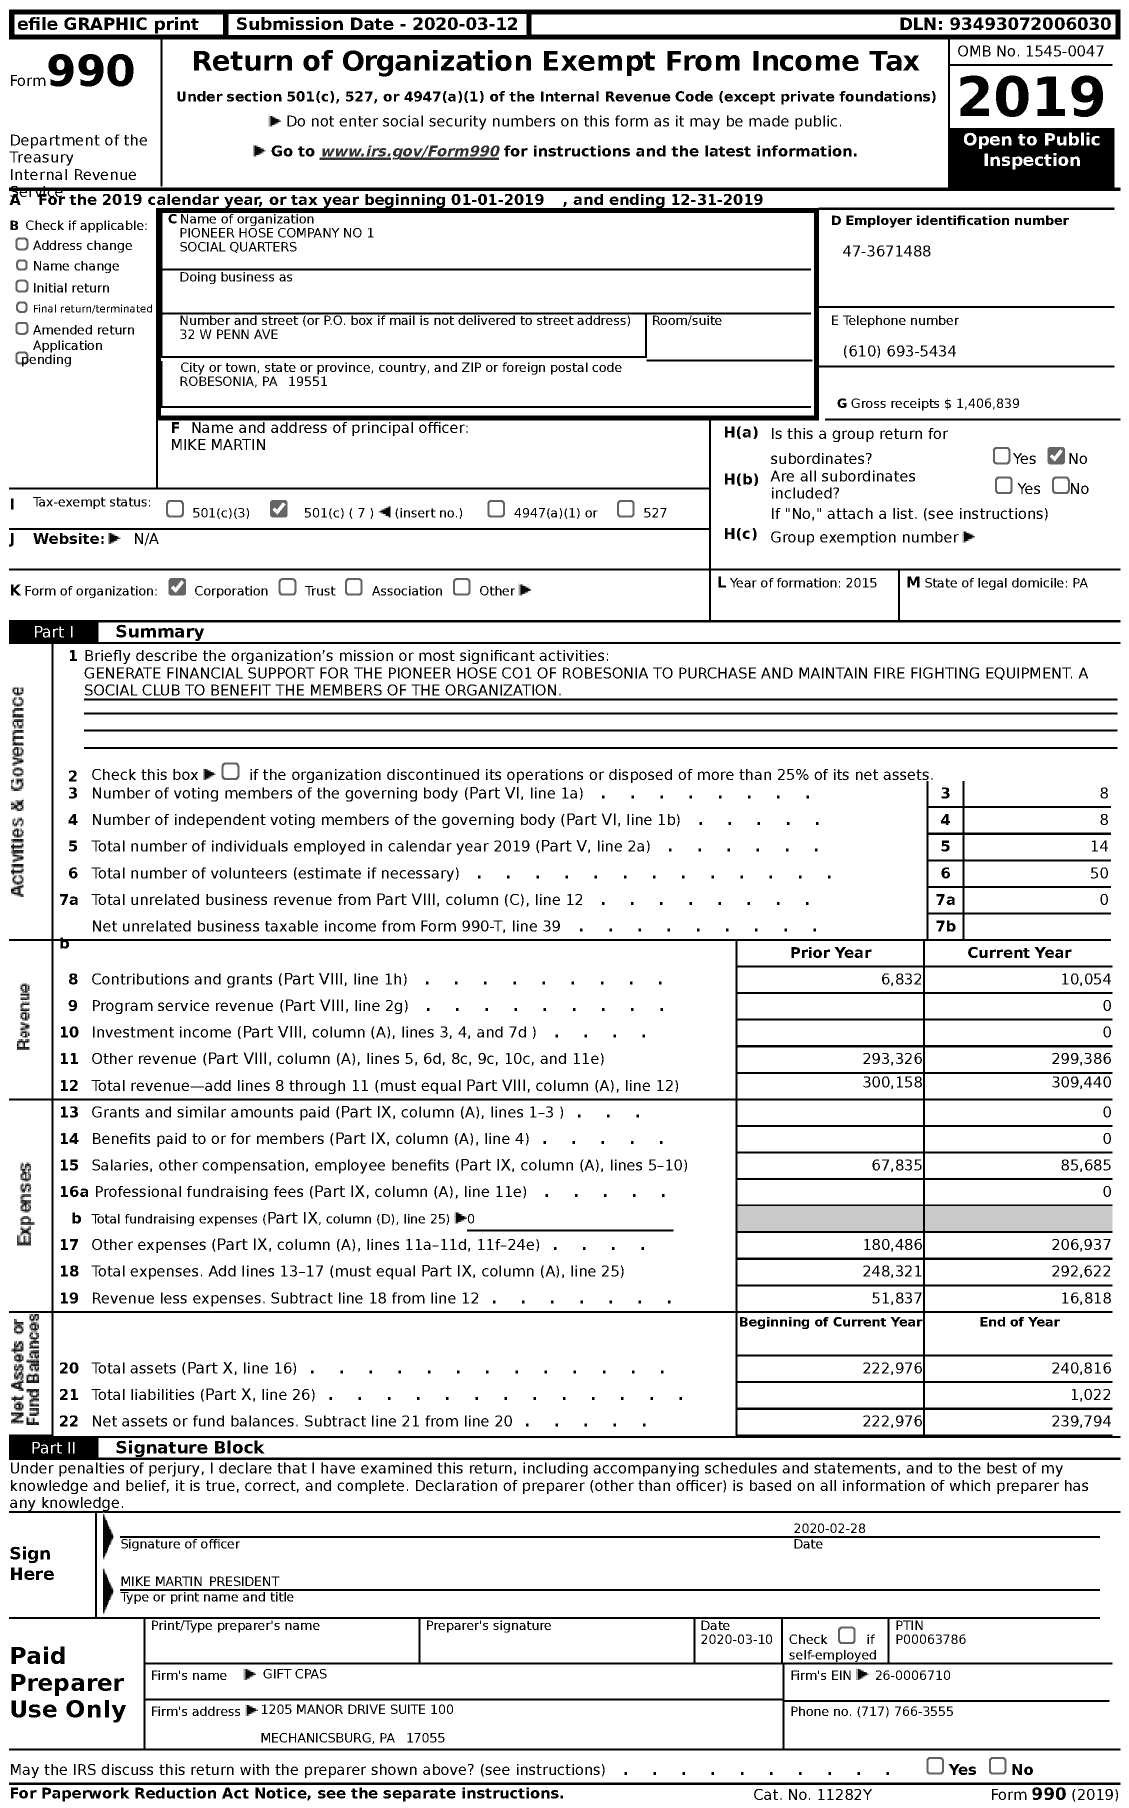 Image of first page of 2019 Form 990 for Pioneer Hose Company No 1 Social Quarters